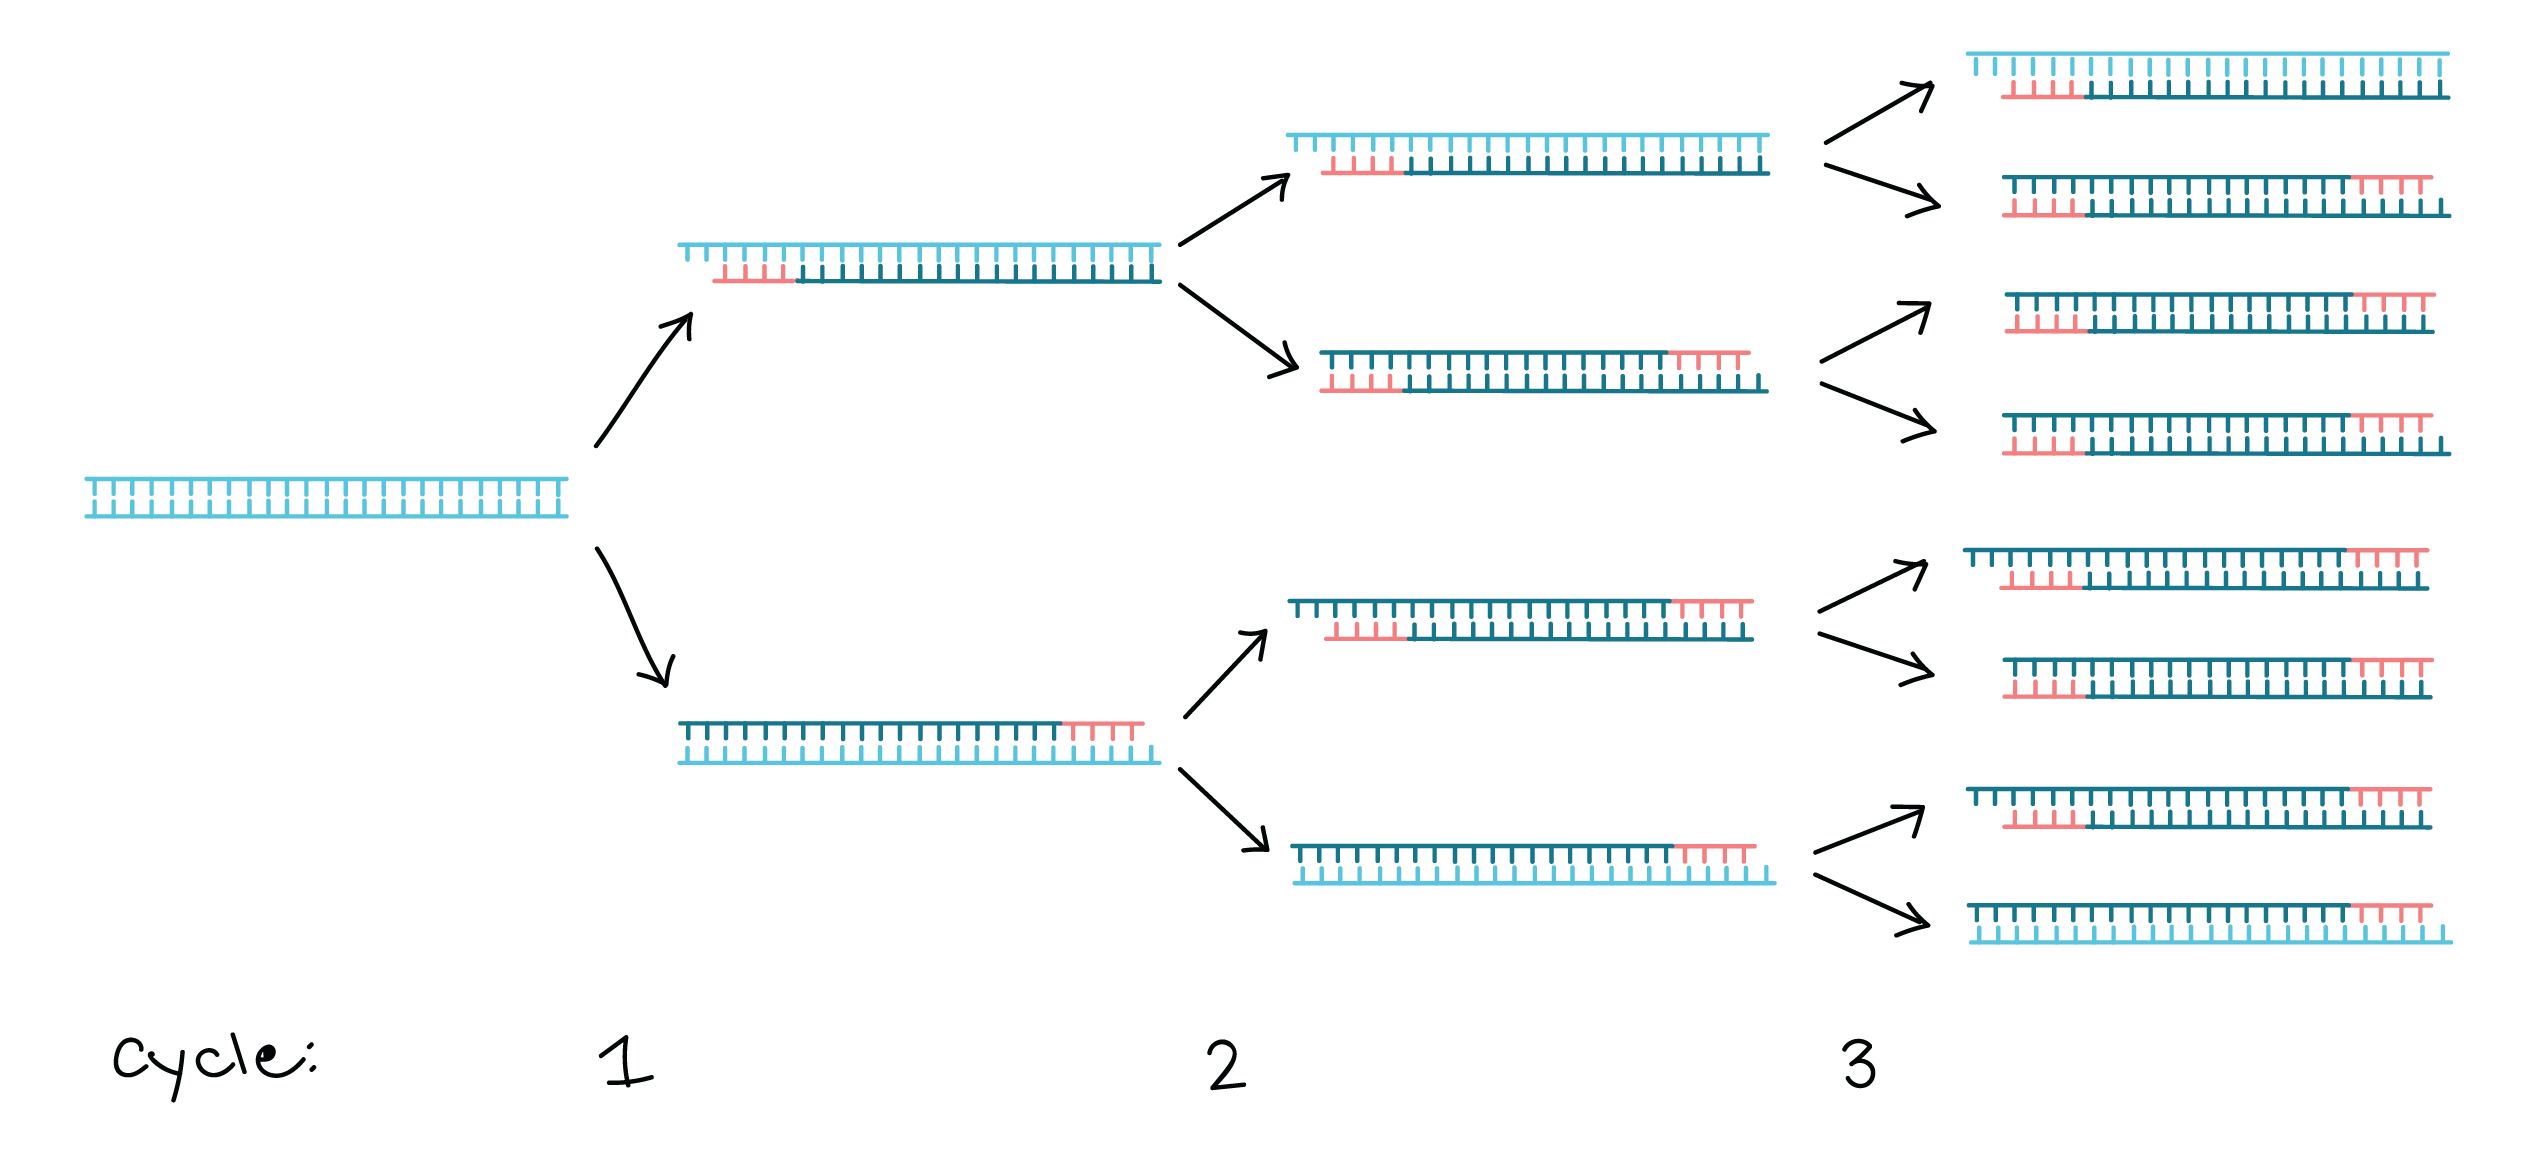 First 3 cycles of PCR.png